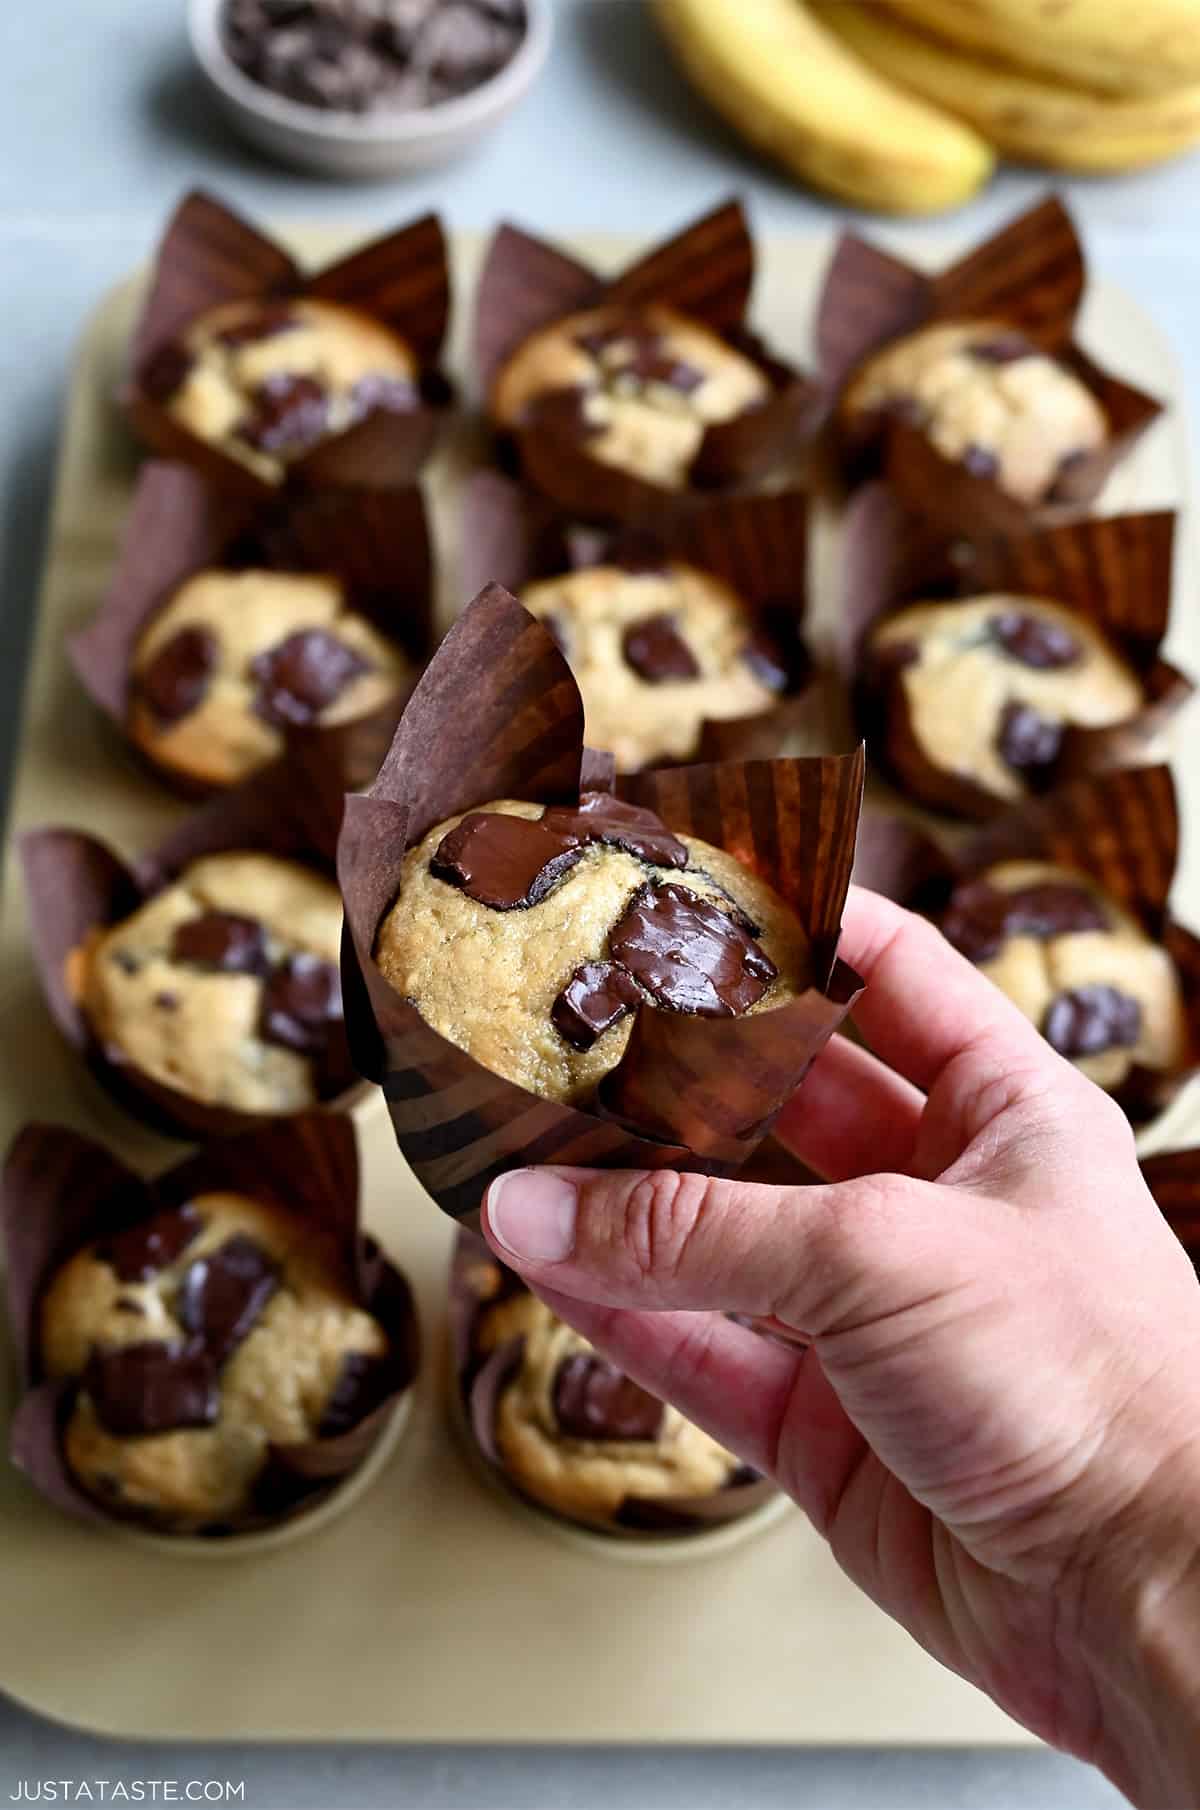 A hand holds a banana chocolate chip muffin above a muffin pan with freshly baked muffins.